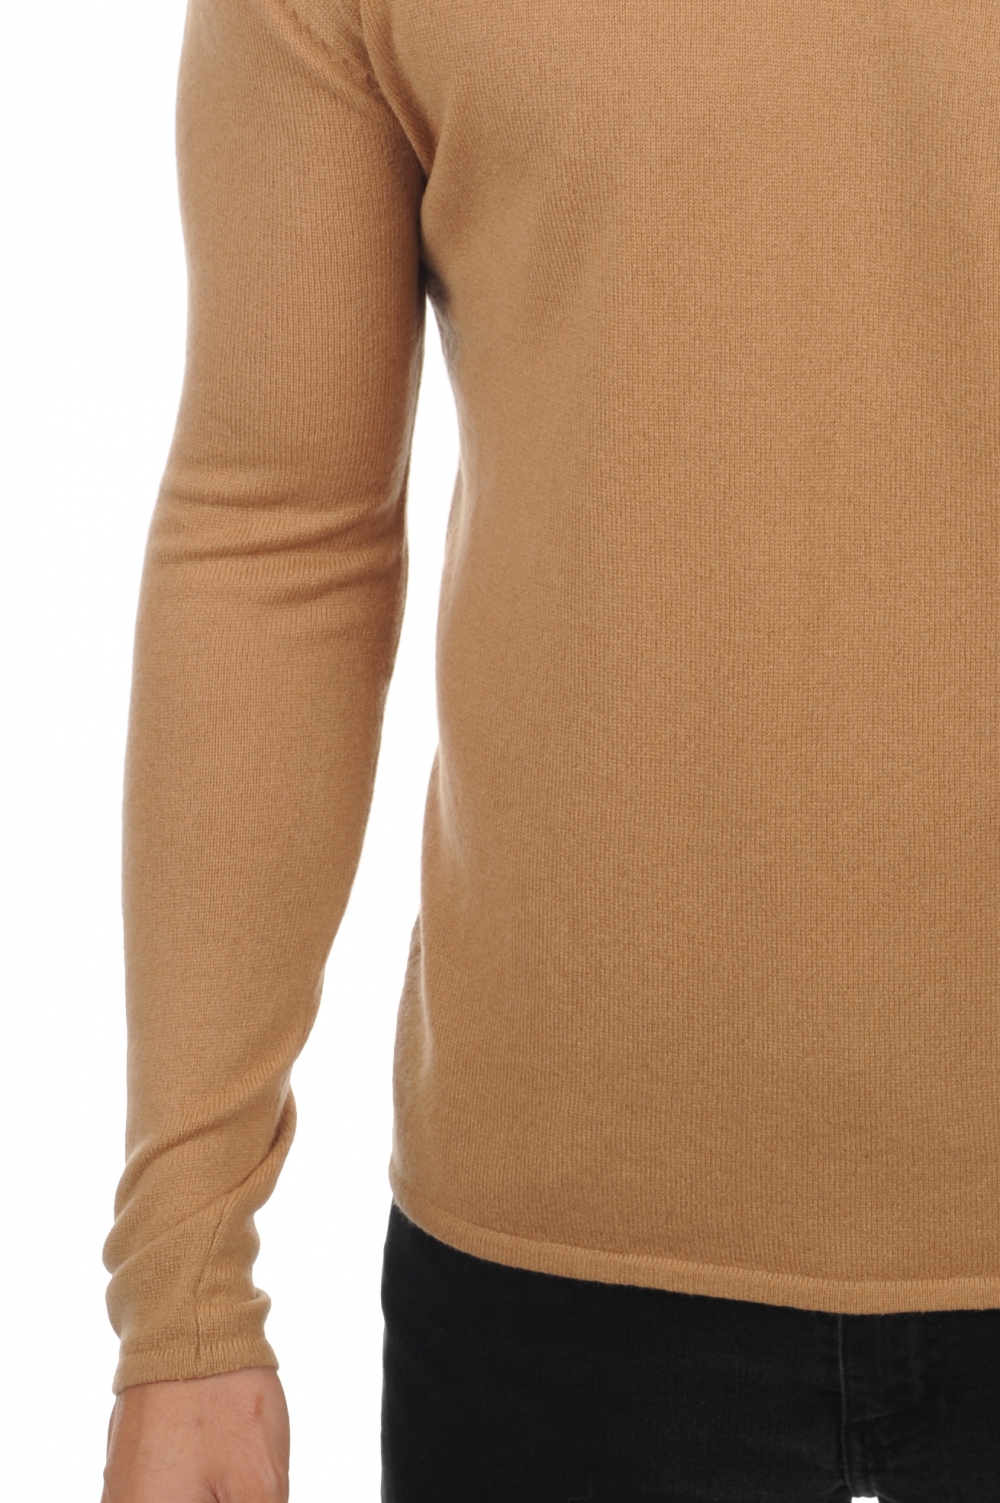 Cachemire pull homme col v arty camel xs